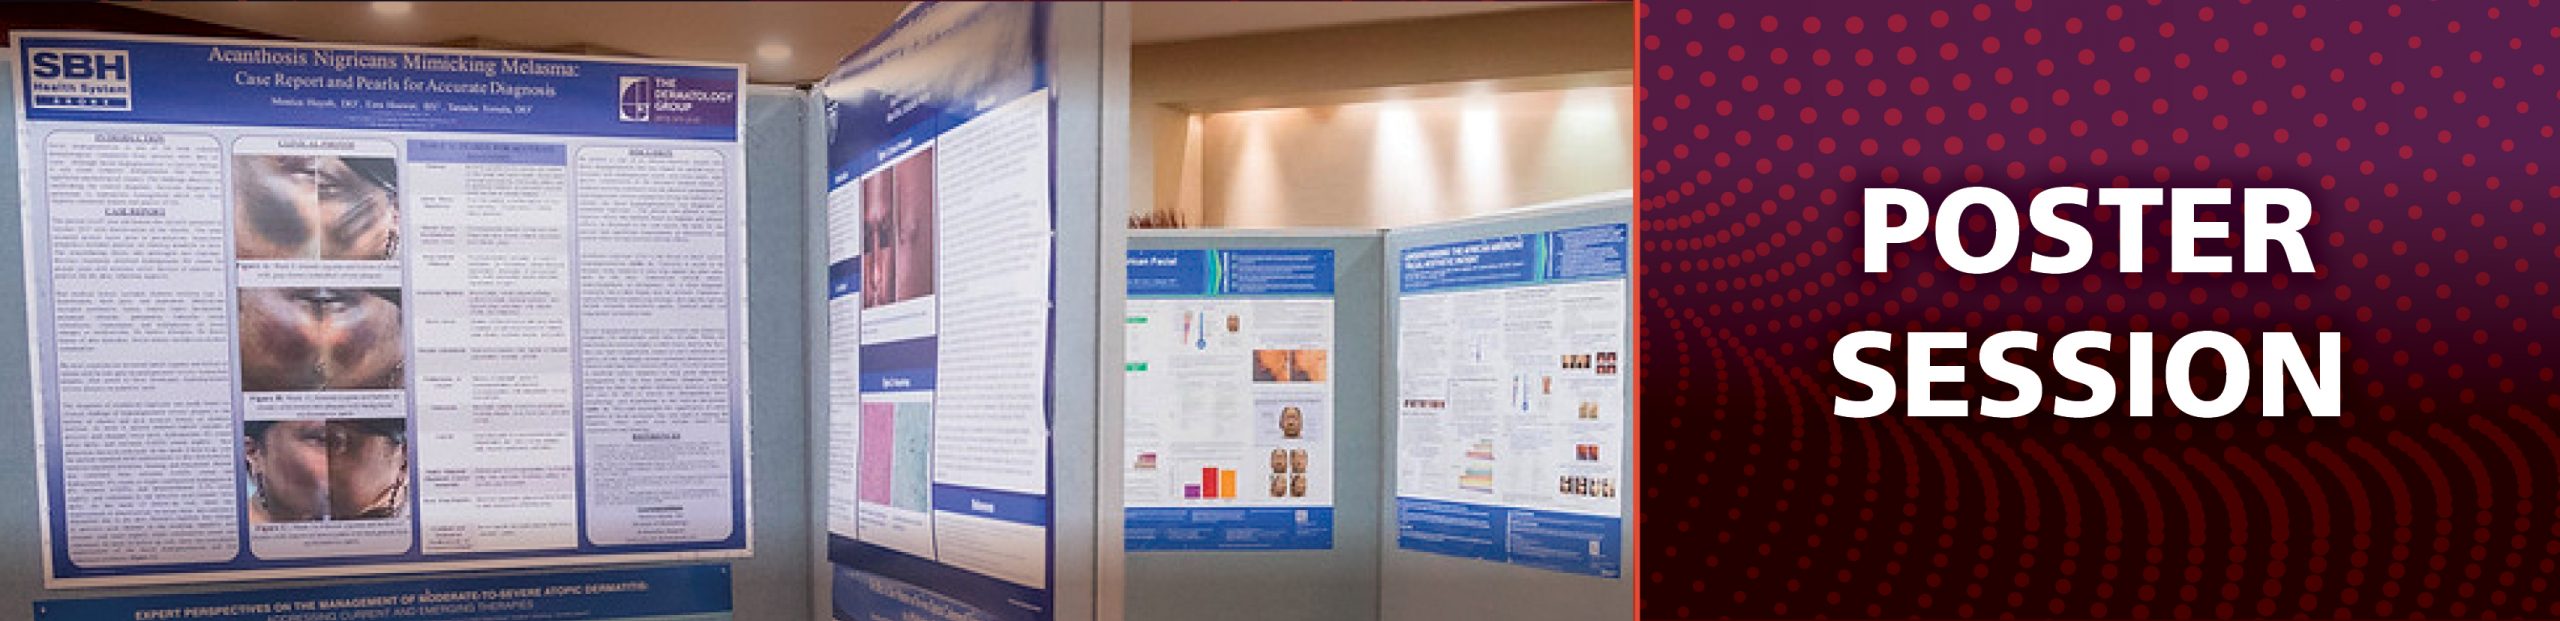 Skin of Color Update 2021 Poster Session